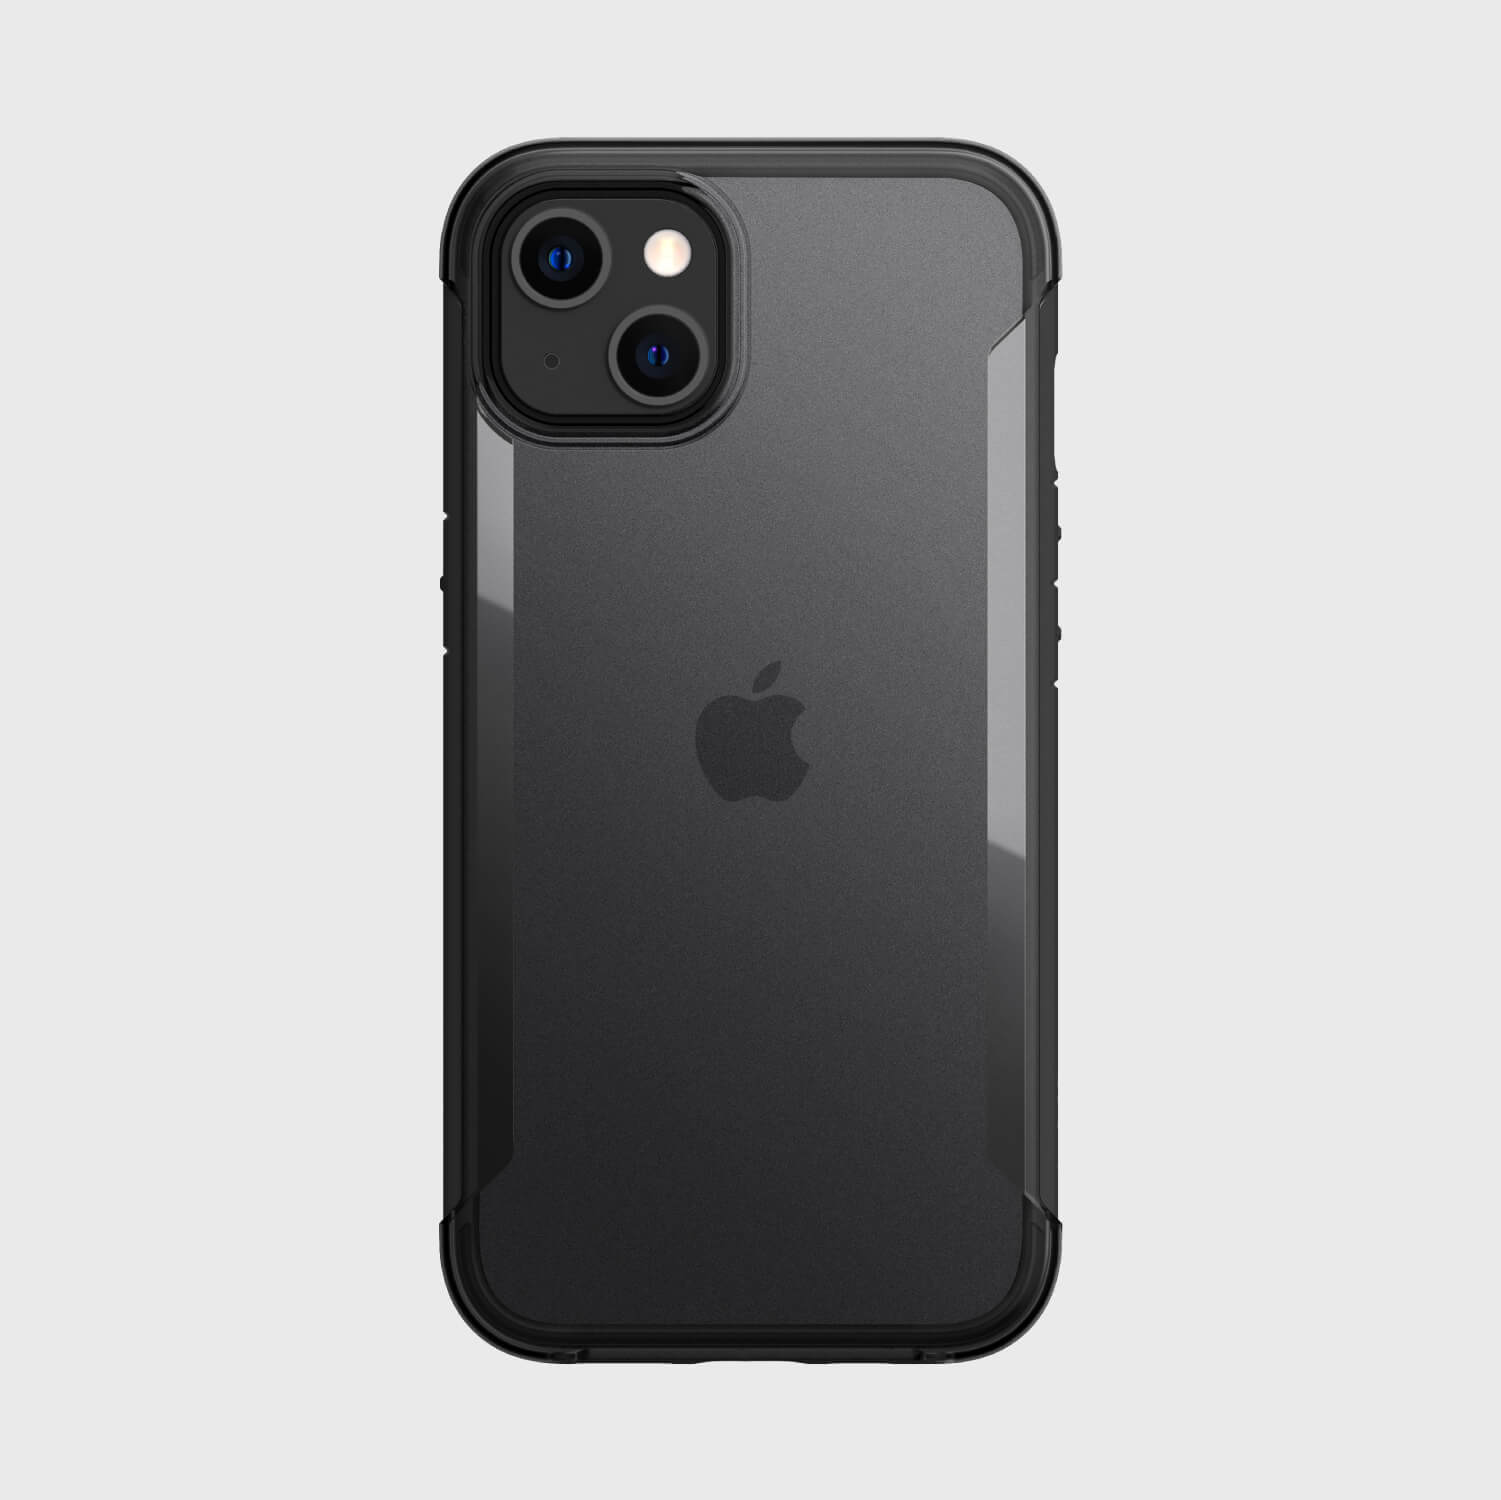 The eco-friendly black iPhone 13 case. 
Product Name: TERRAIN iPhone 13 Case
Brand Name: Raptic